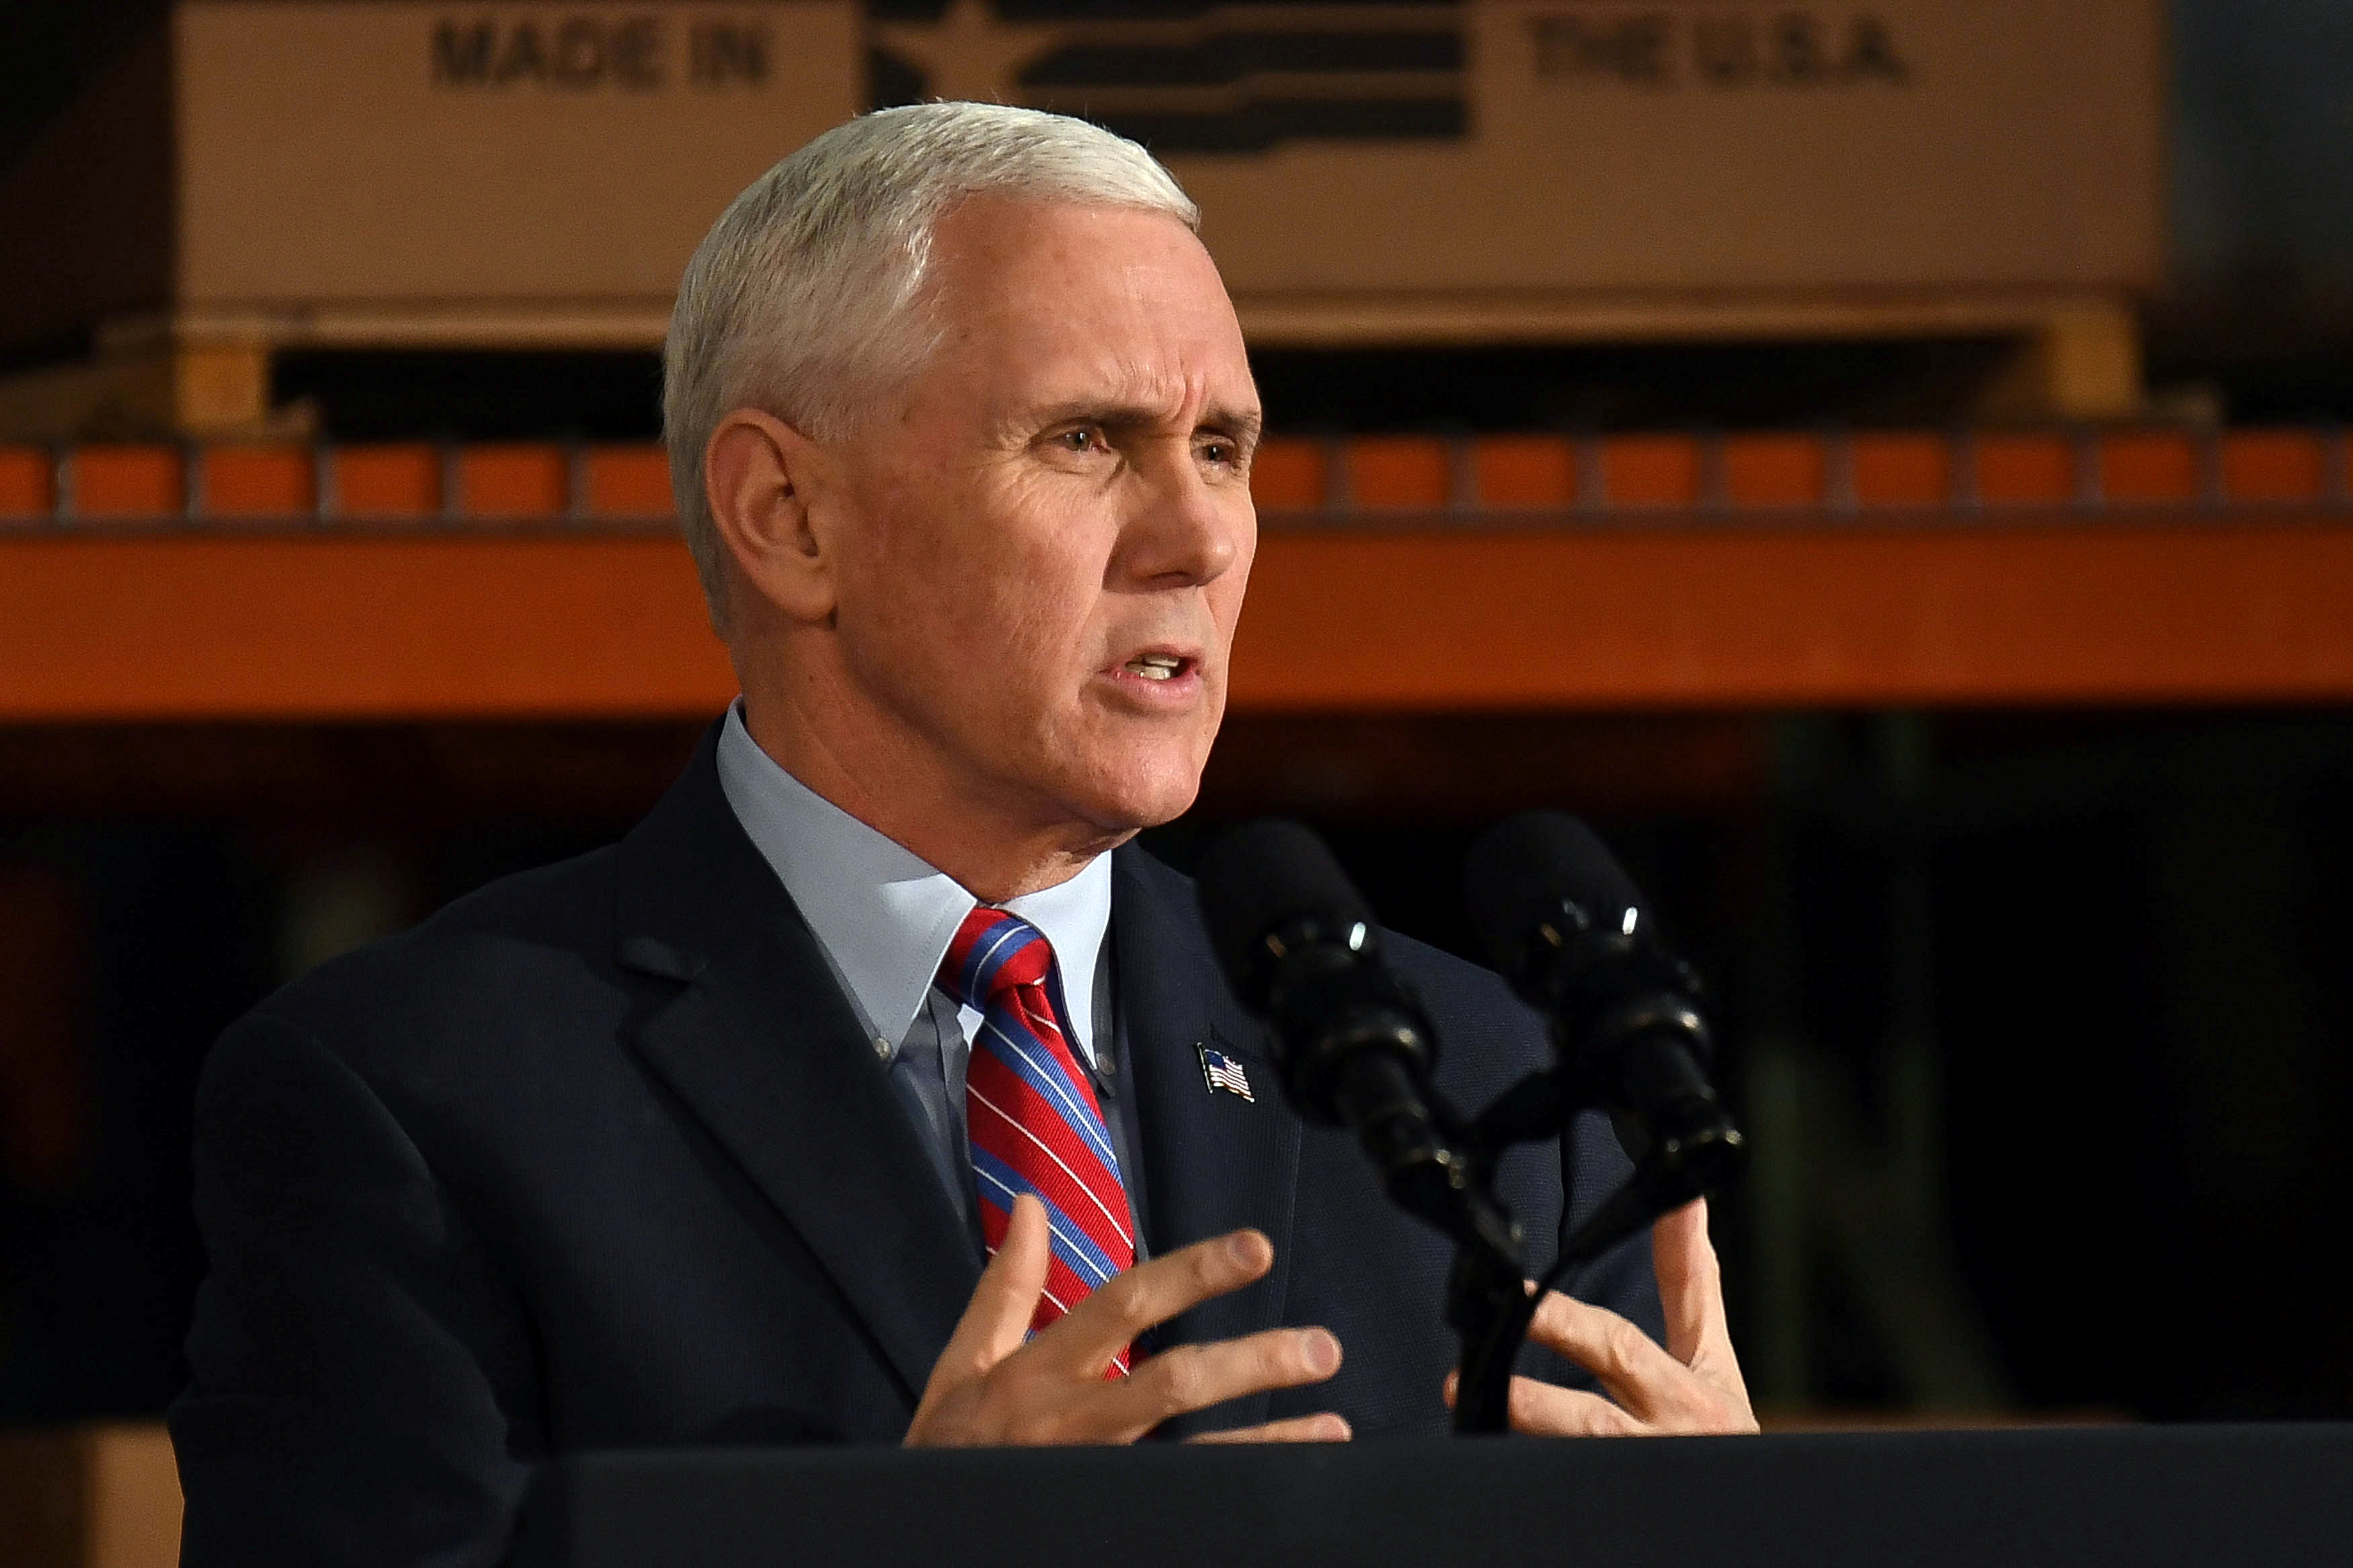 U.S. Vice President Mike Pence speaks  about the American Health Care Act during a visit to the Harshaw-Trane Parts and Distribution Center in Louisville, Kentucky, U.S., March 11, 2017.  REUTERS/Bryan Woolston